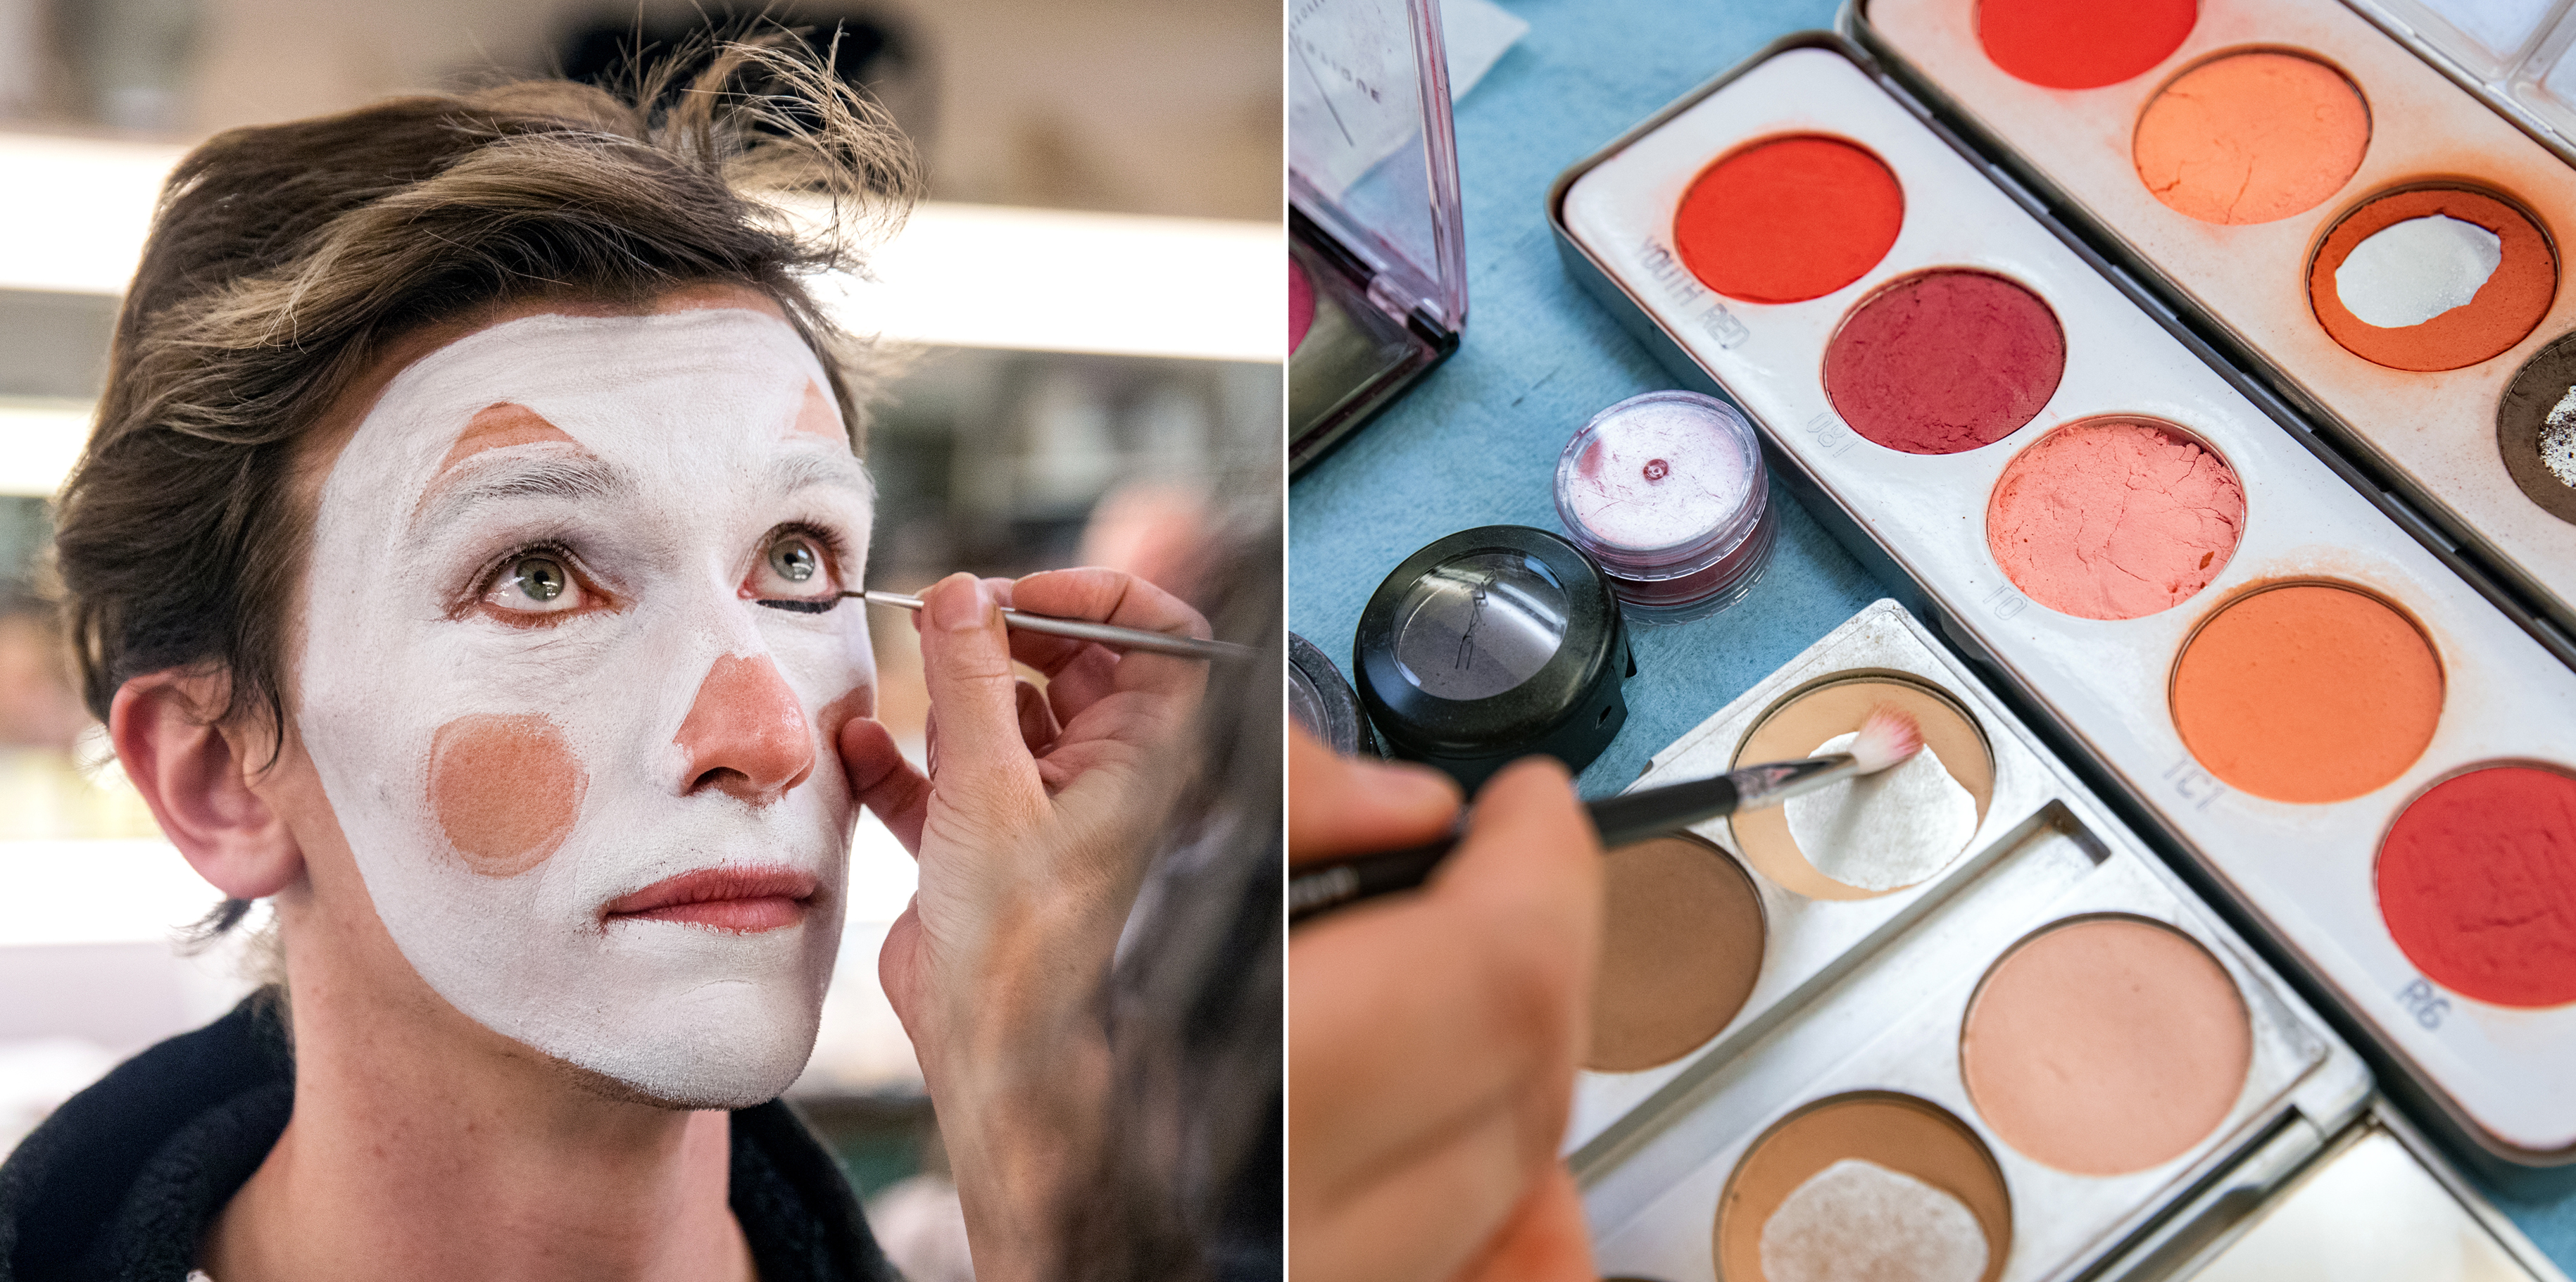 Side by side photos of a man getting makeup added to his face and a detail of a makeup kit.